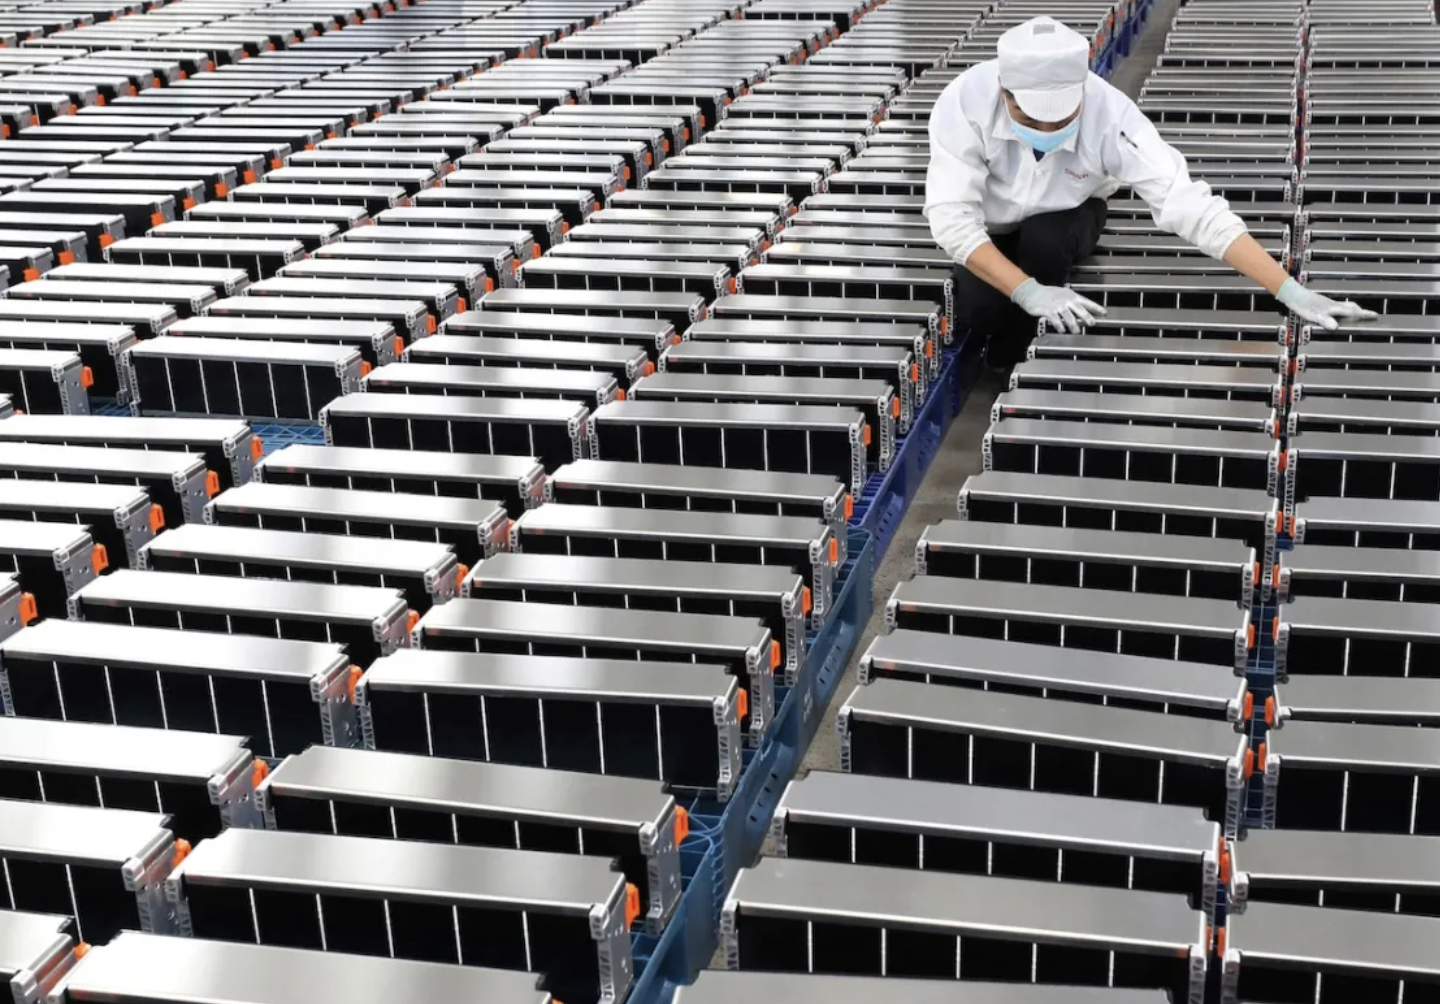 Inside Xinwangda company in Nanjing, where lithium batteries are produced for electric cars and other purposes. Photo: AFP